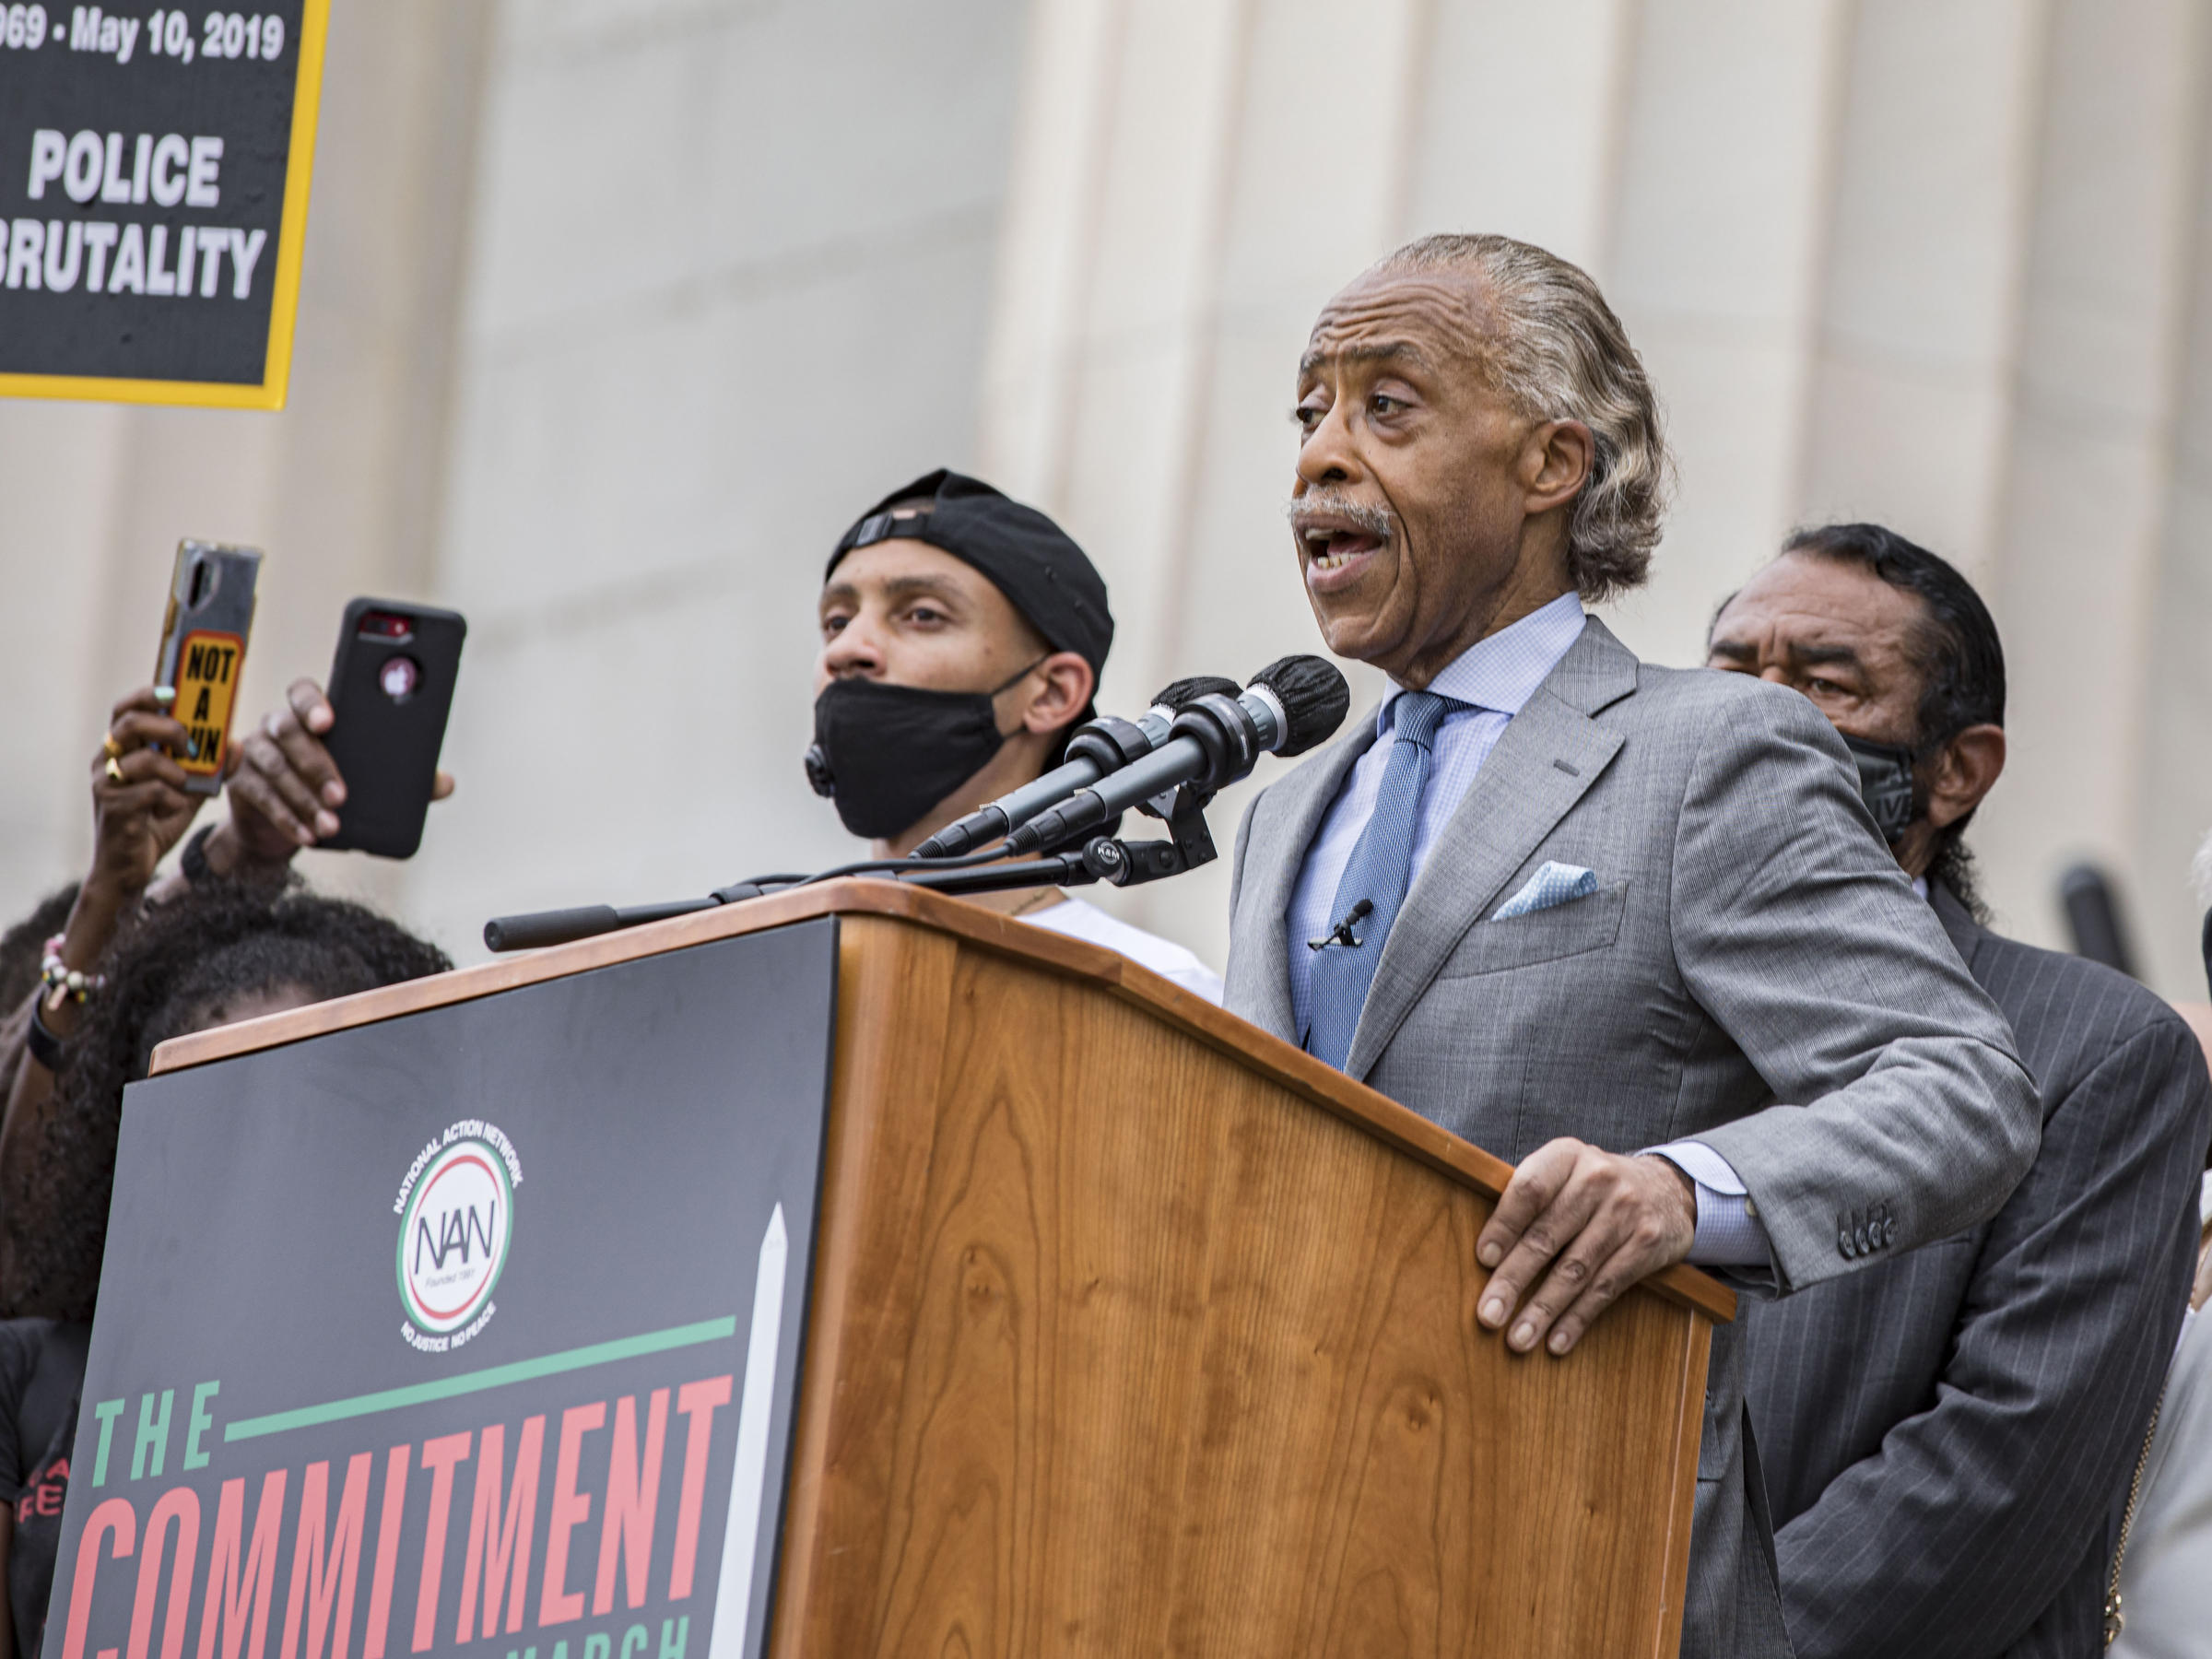 Al Sharpton Policing In America Will Change Because Of Floyd's